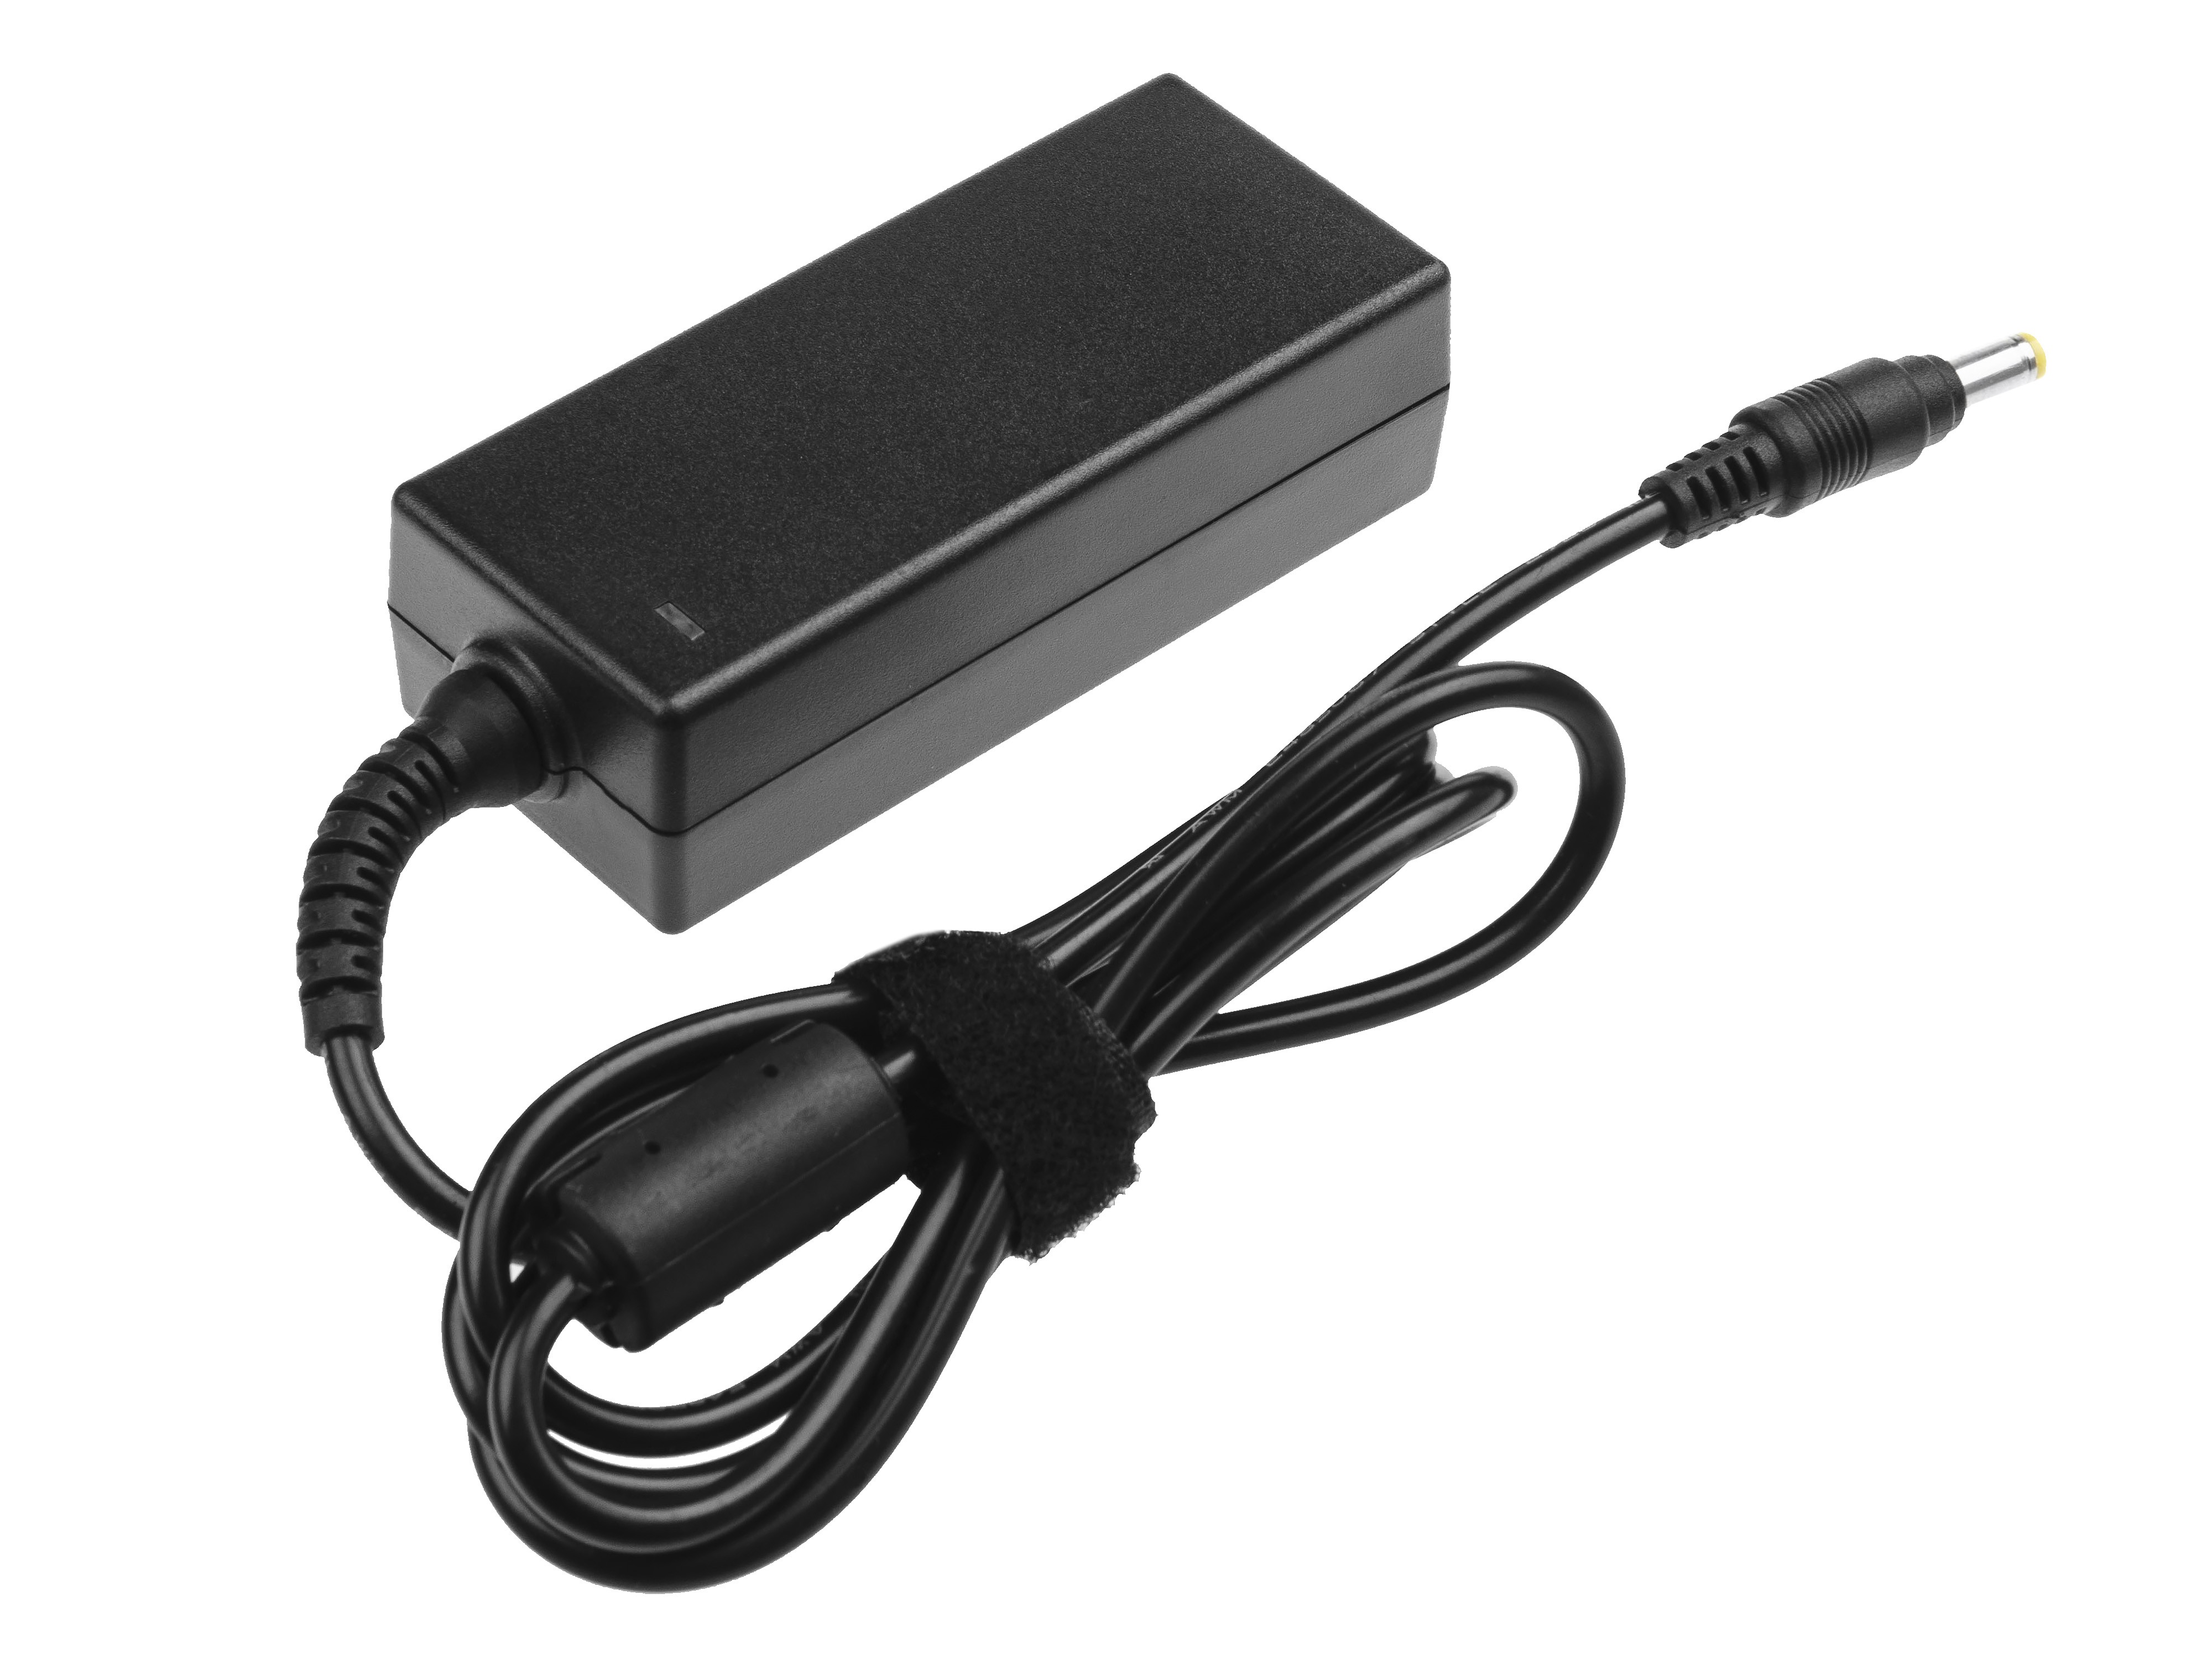 Green Cell PRO lader / AC Adapter til Asus Eee PC 901 904 -12V 3A 36W